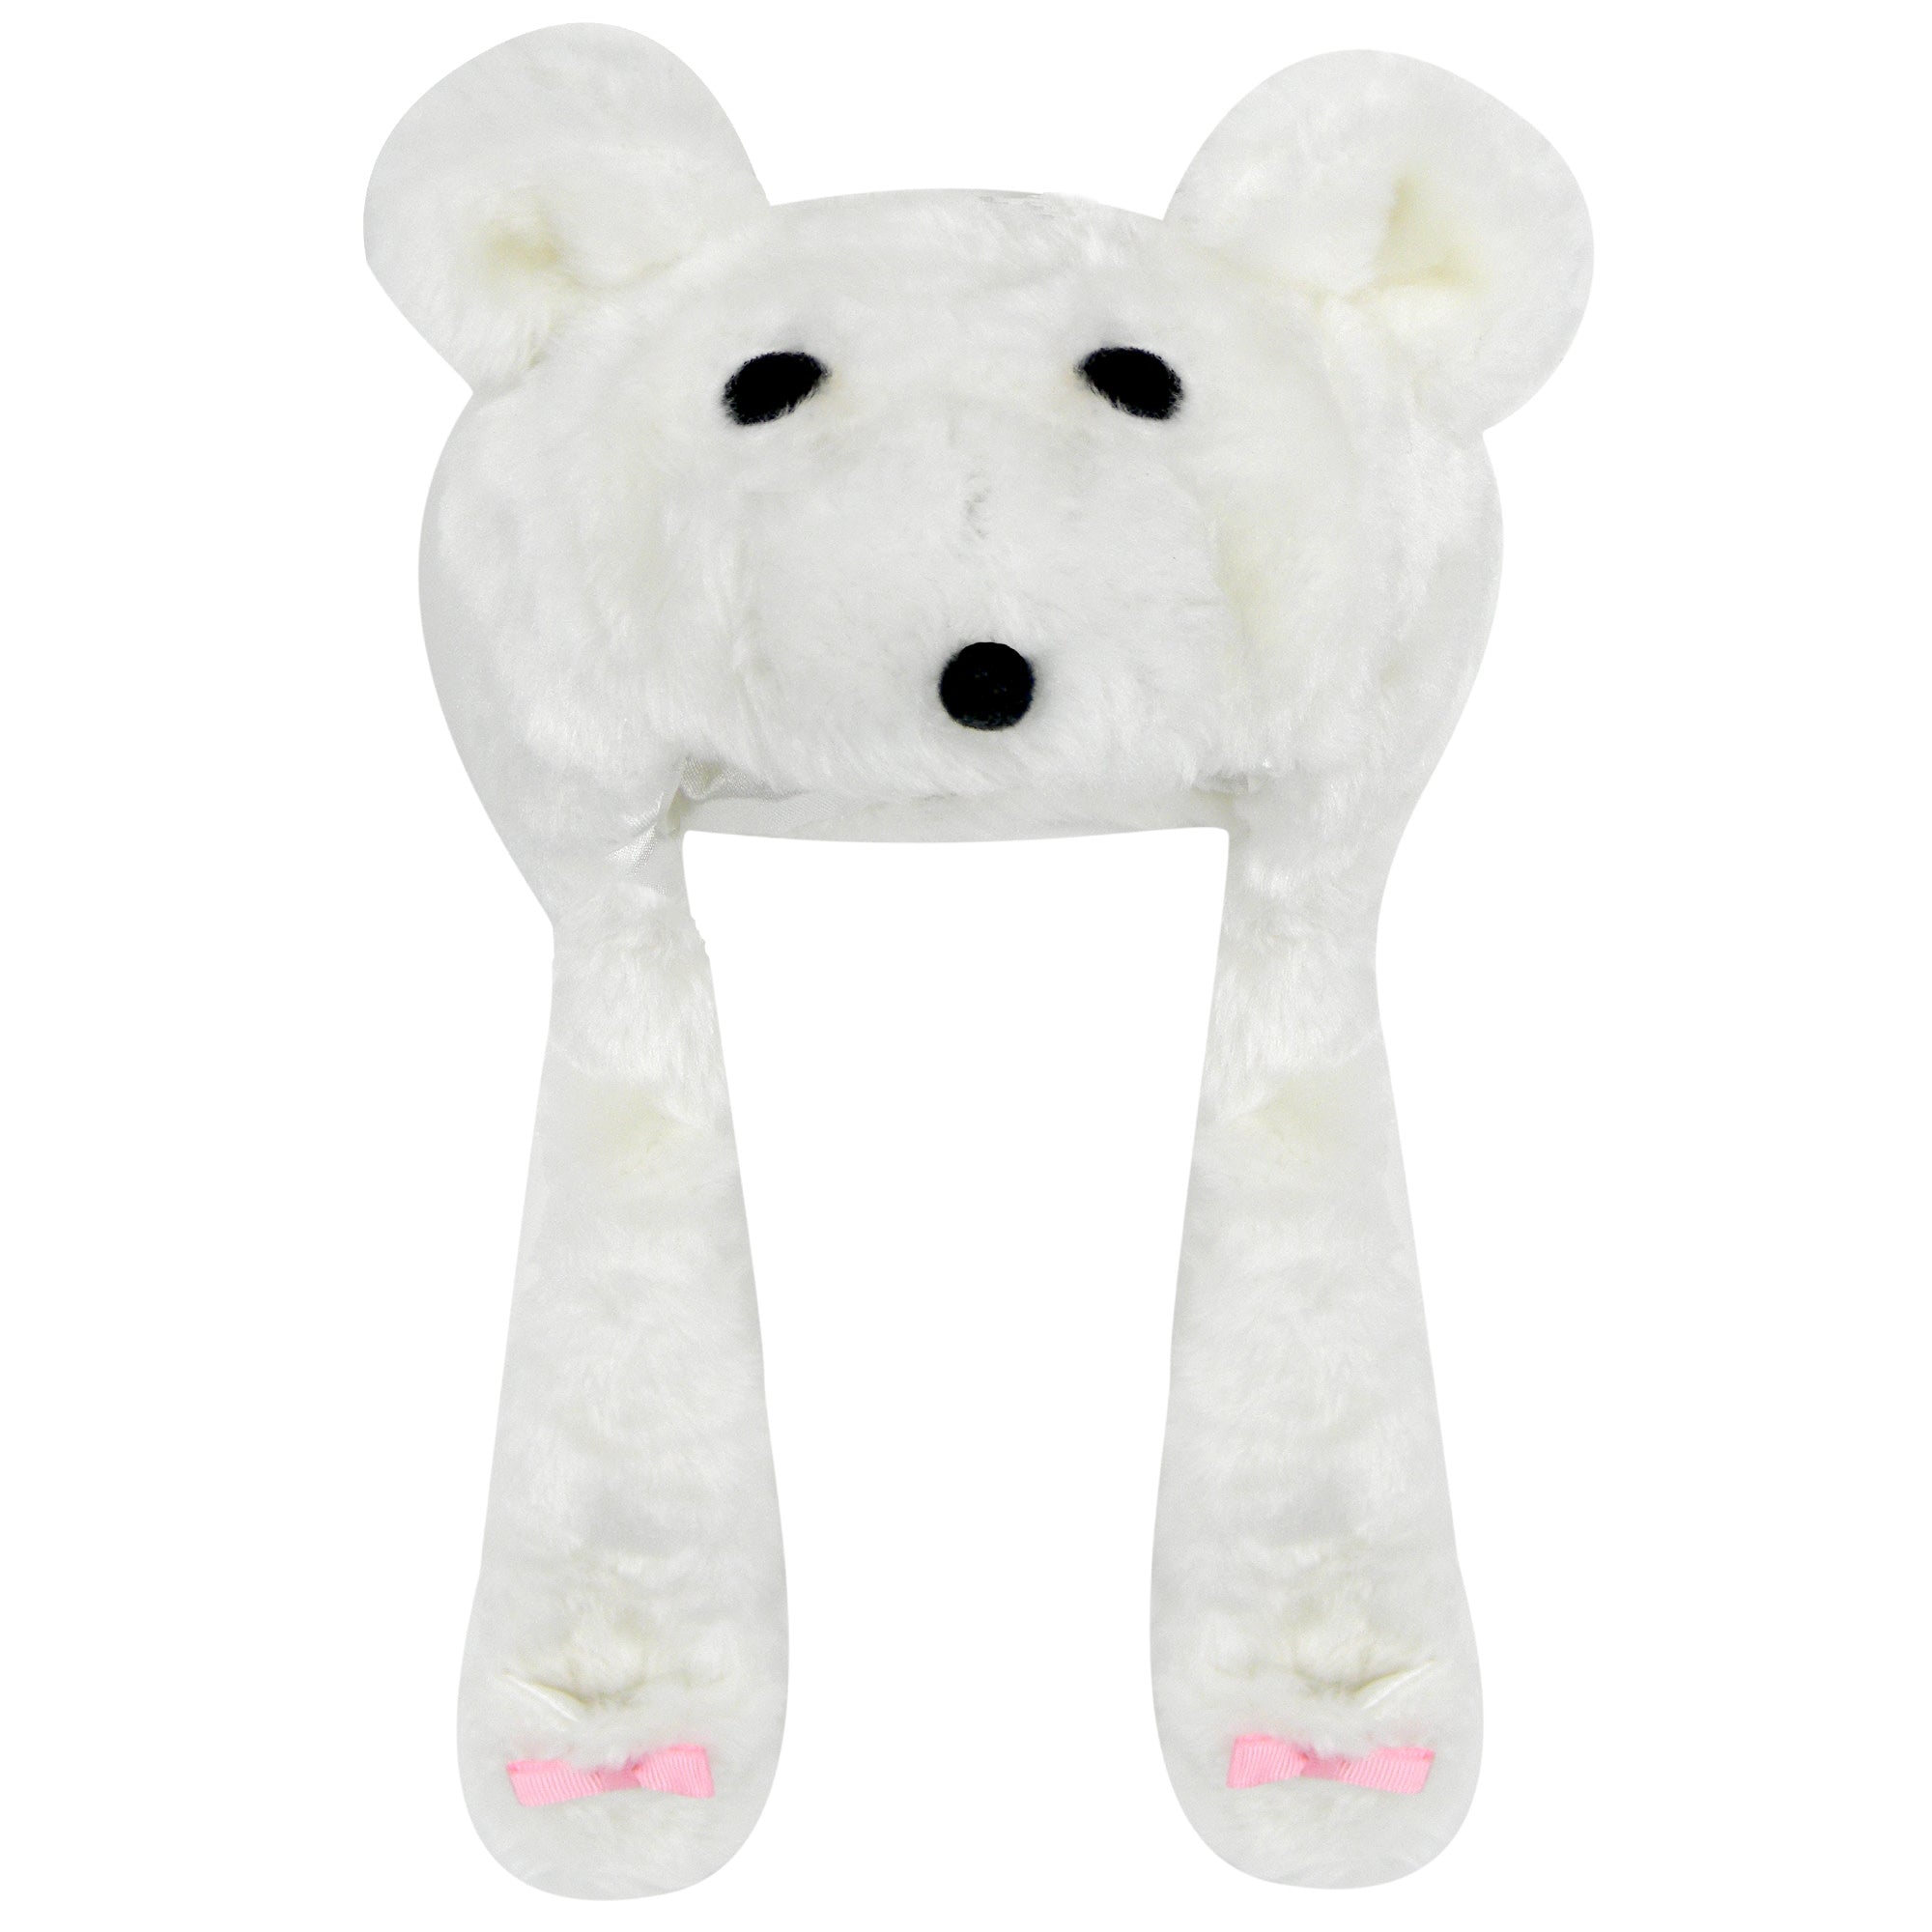 Sophia’s Cute Animal Friend Polar Bear Faux Fur Hat with Built-In Hand-Warming Pockets and Pink Bows for 18” Dolls, White